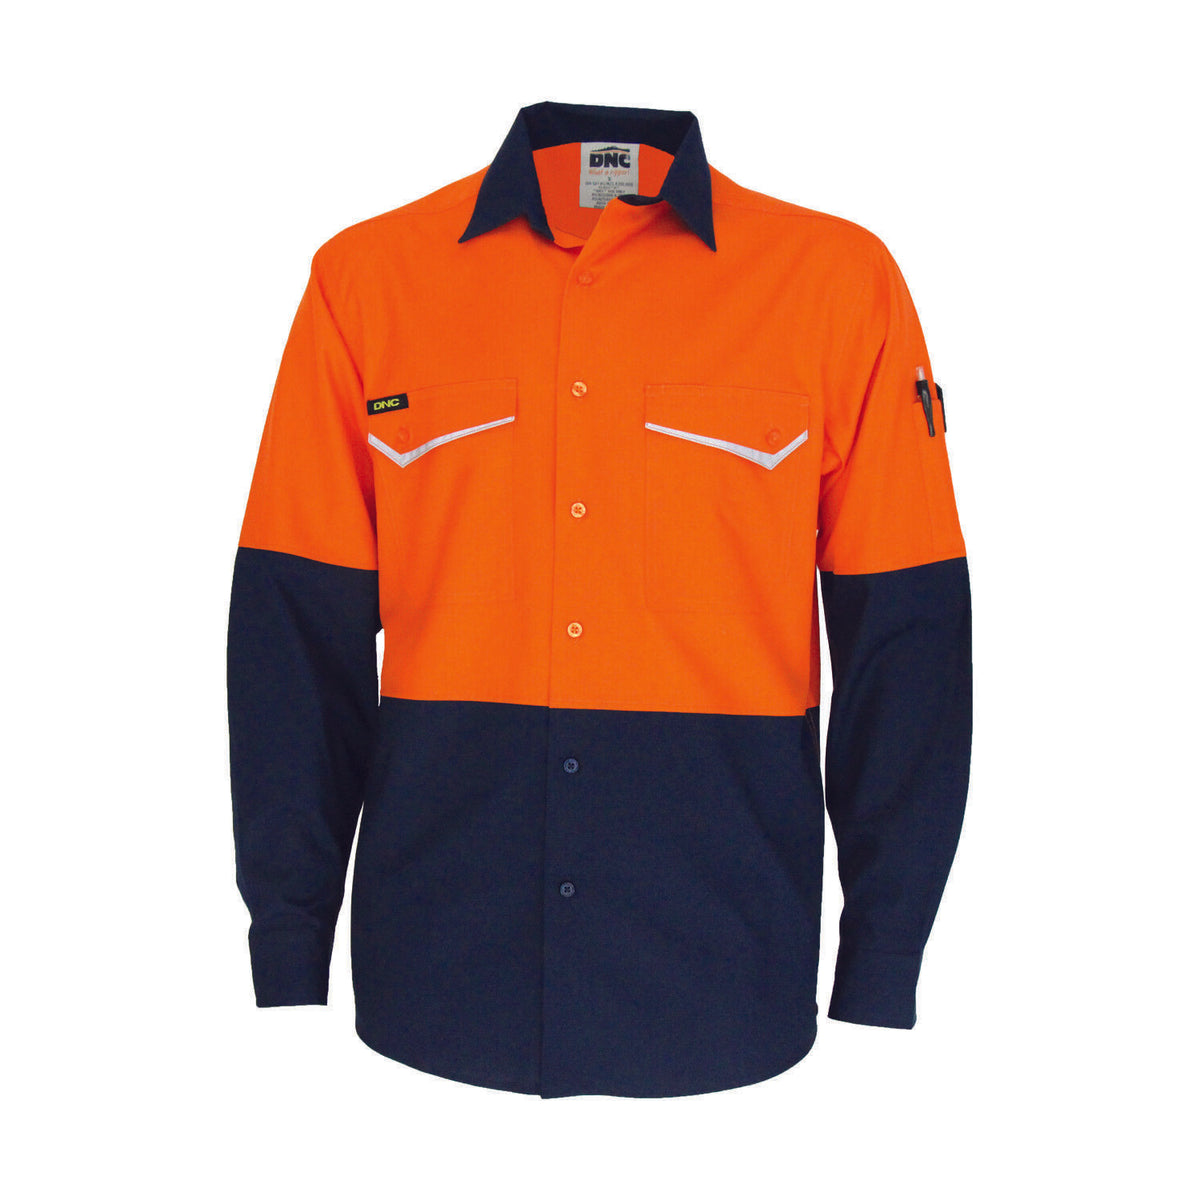 DNC Mens Tradies Two-Tone RipStop Cotton Workwear Lightweight Breathable 3586